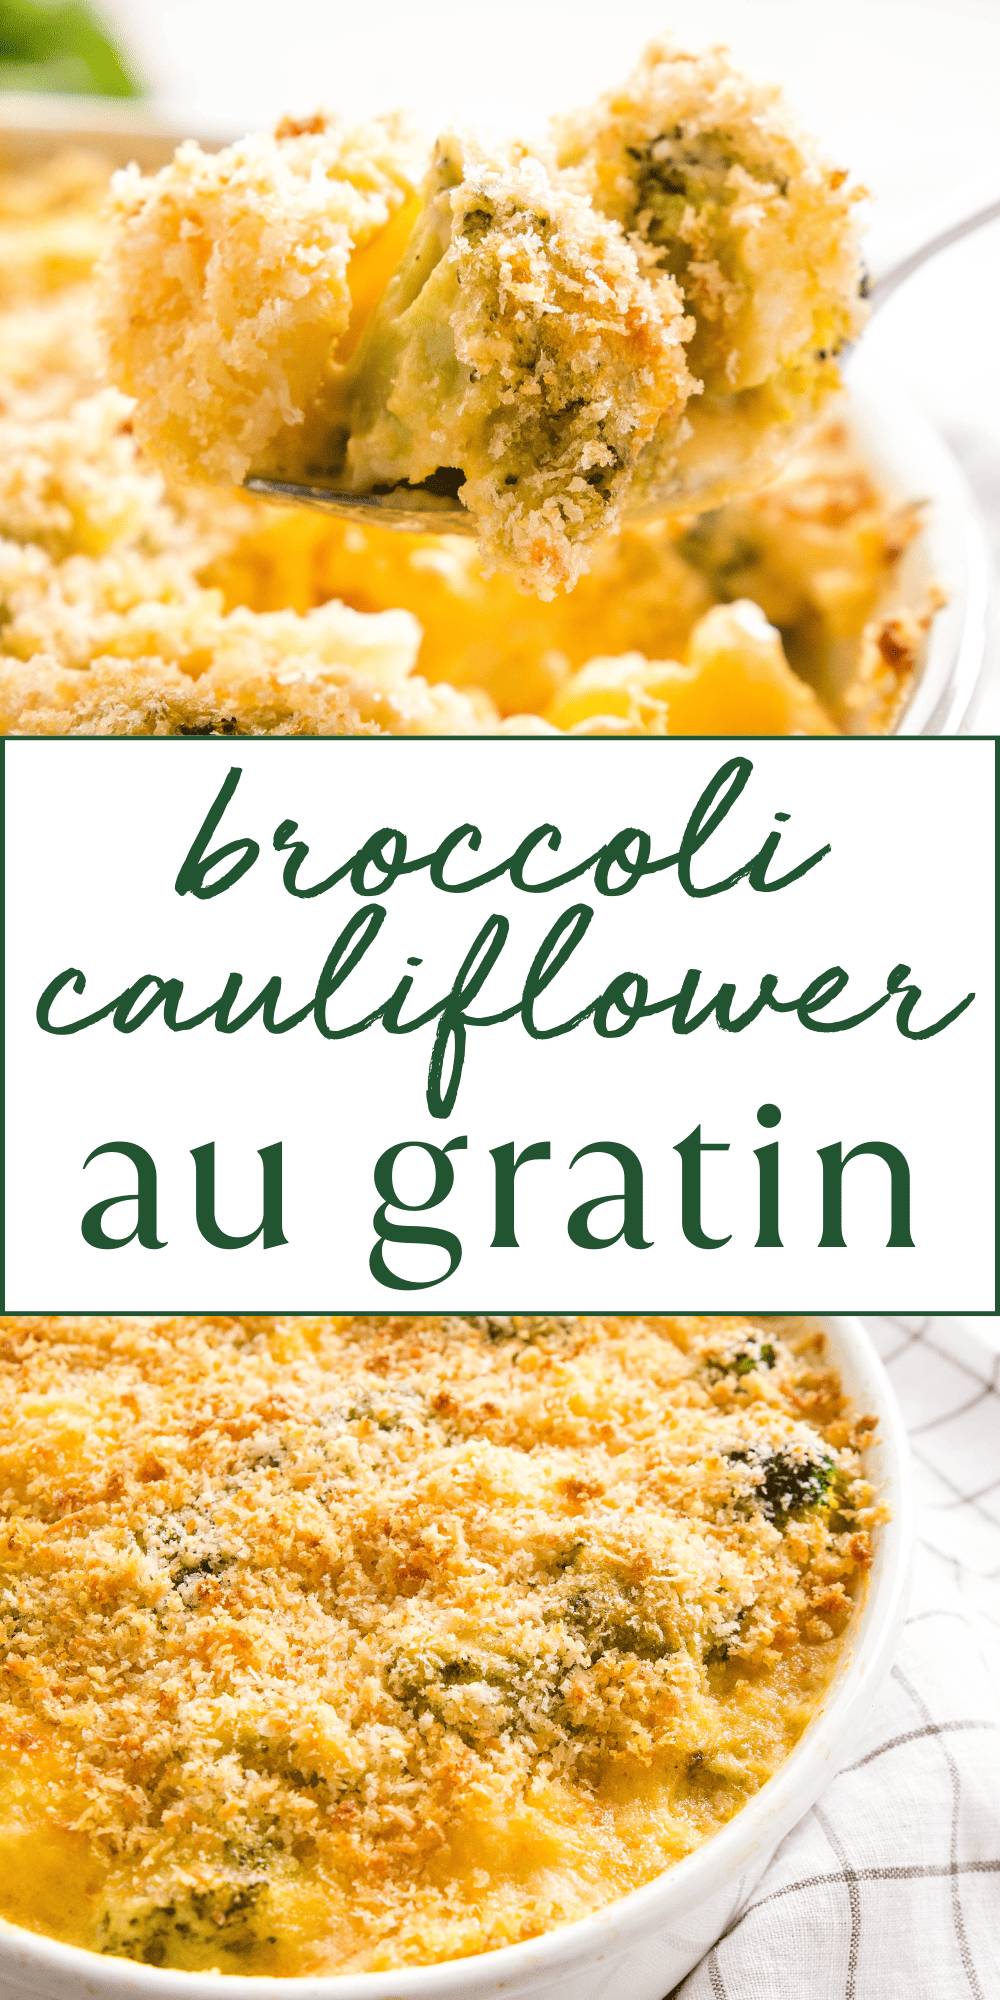 This Broccoli Cauliflower Casserole is the perfect side dish for the holidays or any occasion! Made with tons of fresh veggies and an easy homemade cheese sauce, and baked to comfort food perfection! Recipe from thebusybaker.ca! #holidaysidedish #easysidedish #broccolicheesecasserole #broccolicasserole #broccolicauliflowercasserole via @busybakerblog